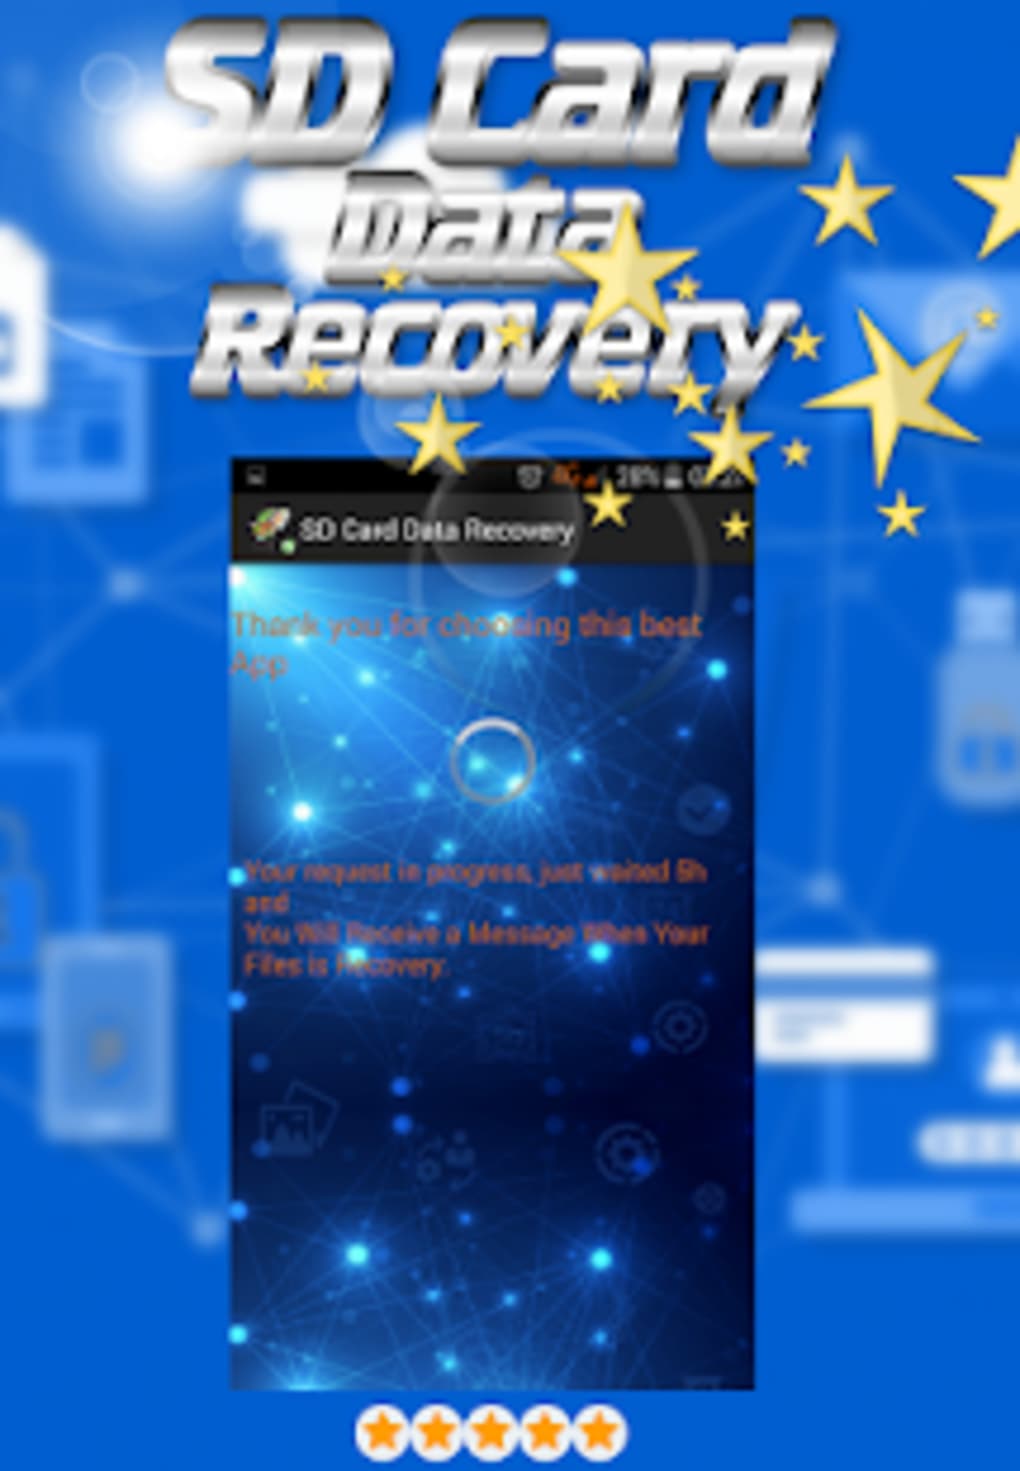 Free download photo recovery app for android tv